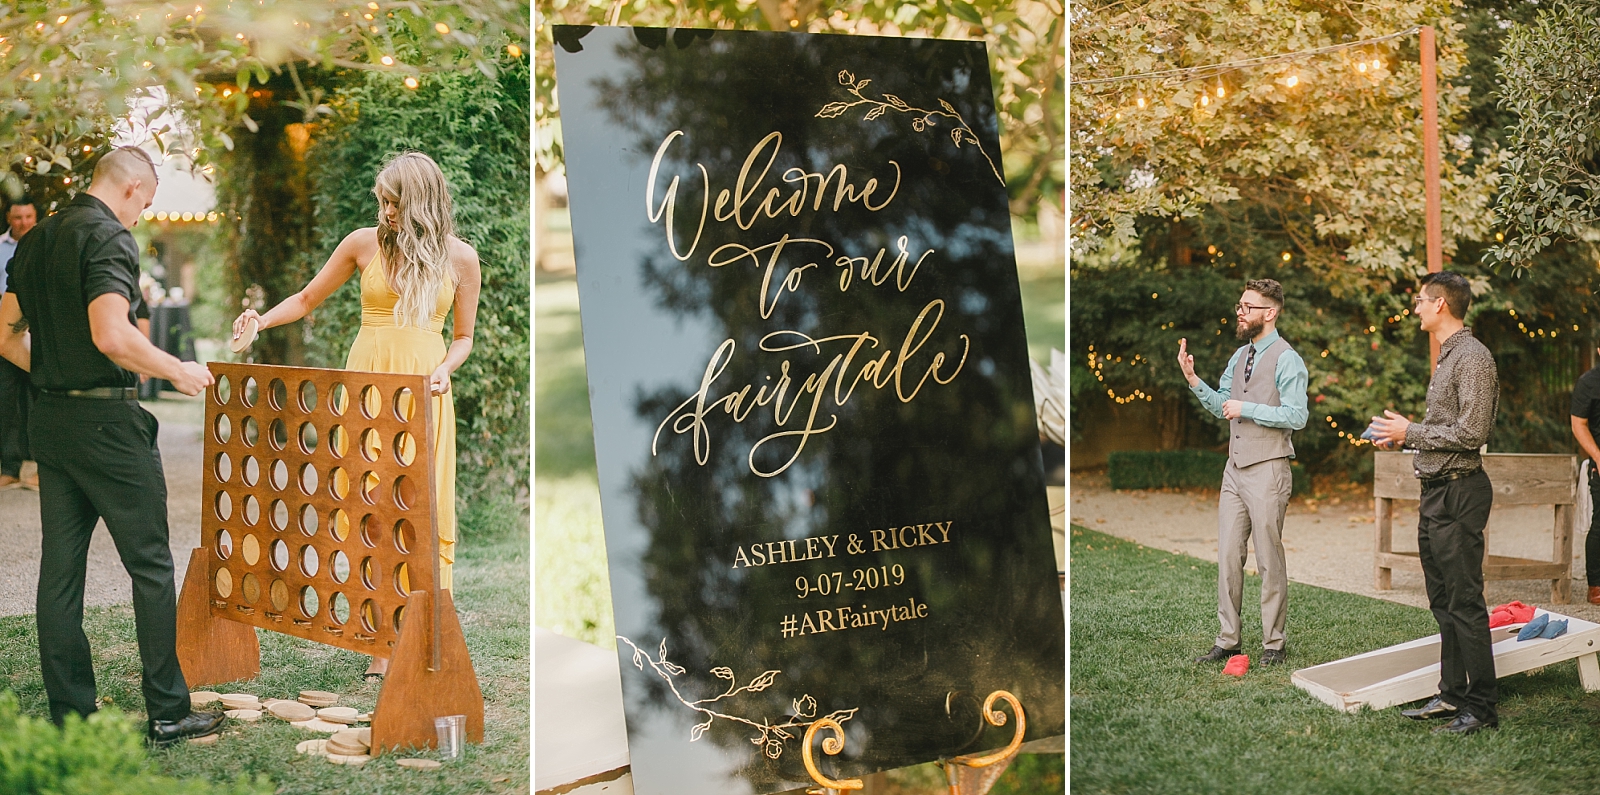 Fairytale inspired wedding outdoor cocktail hour yard games